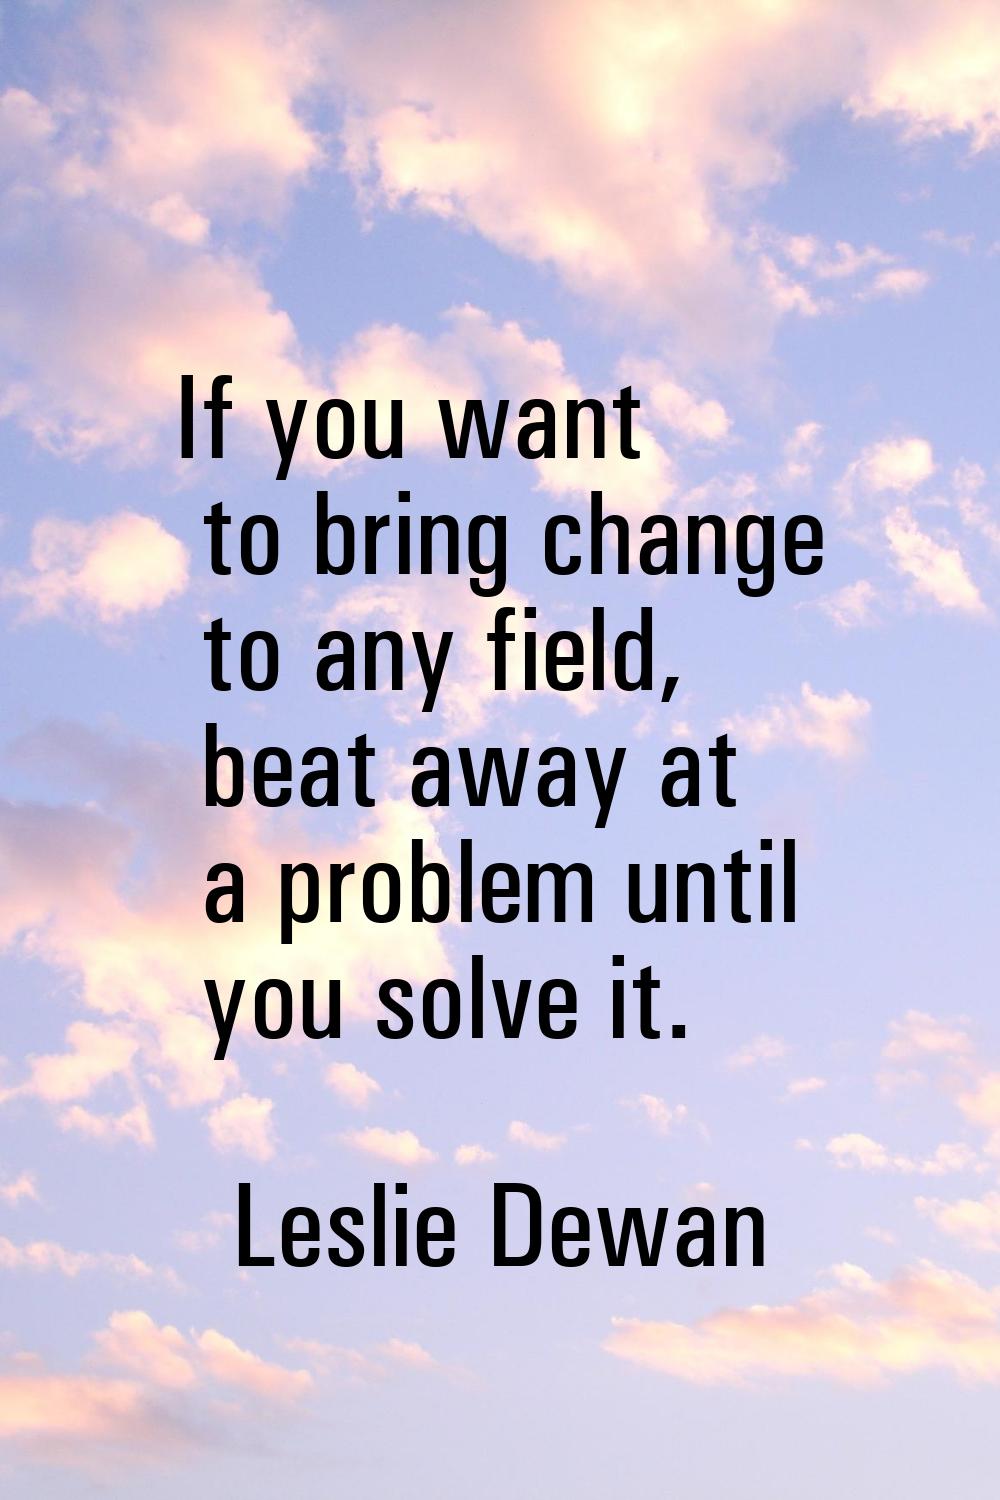 If you want to bring change to any field, beat away at a problem until you solve it.